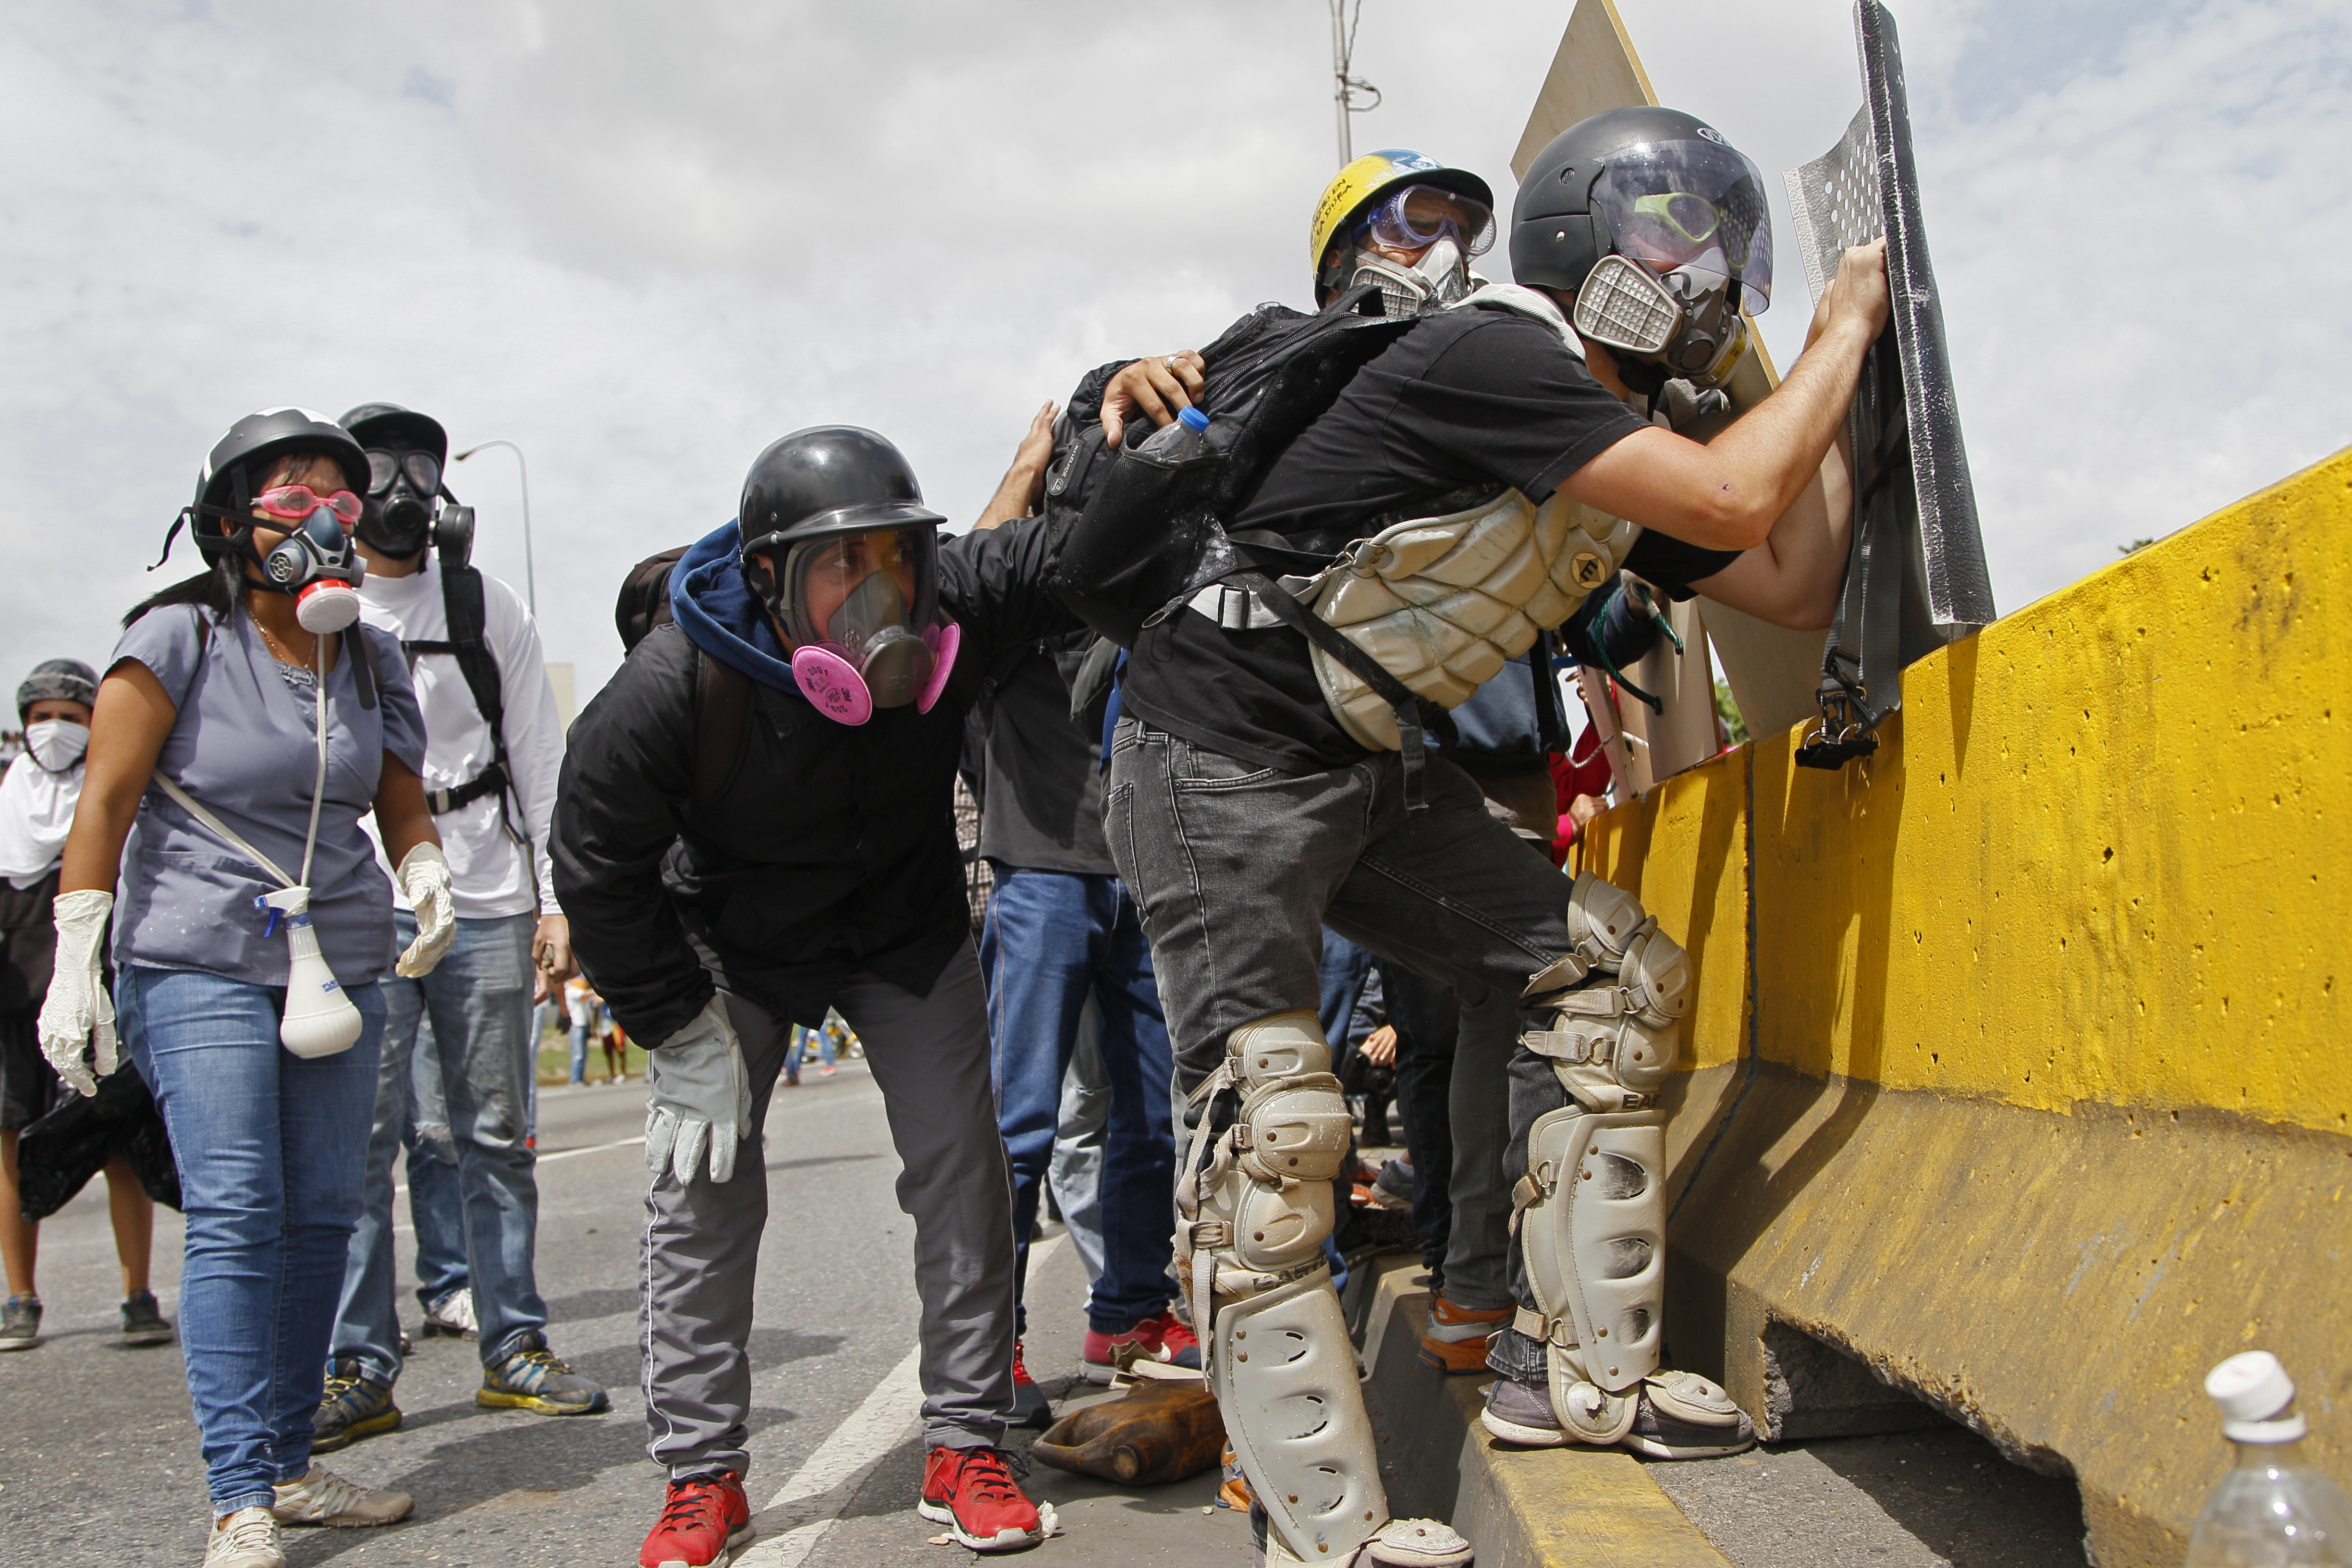 A demonstrator wearing baseball catchers' gear takes cover behind a highway median during clashes with government forces at a march against the government of President Nicolas Maduro in Caracas, Venezuela, Wednesday, May 31, 2017. Protests have left dozens dead in the last two months. The opposition wants immediate presidential elections and the liberation of political prisoners. (AP Photo/Ariana Cubillos)